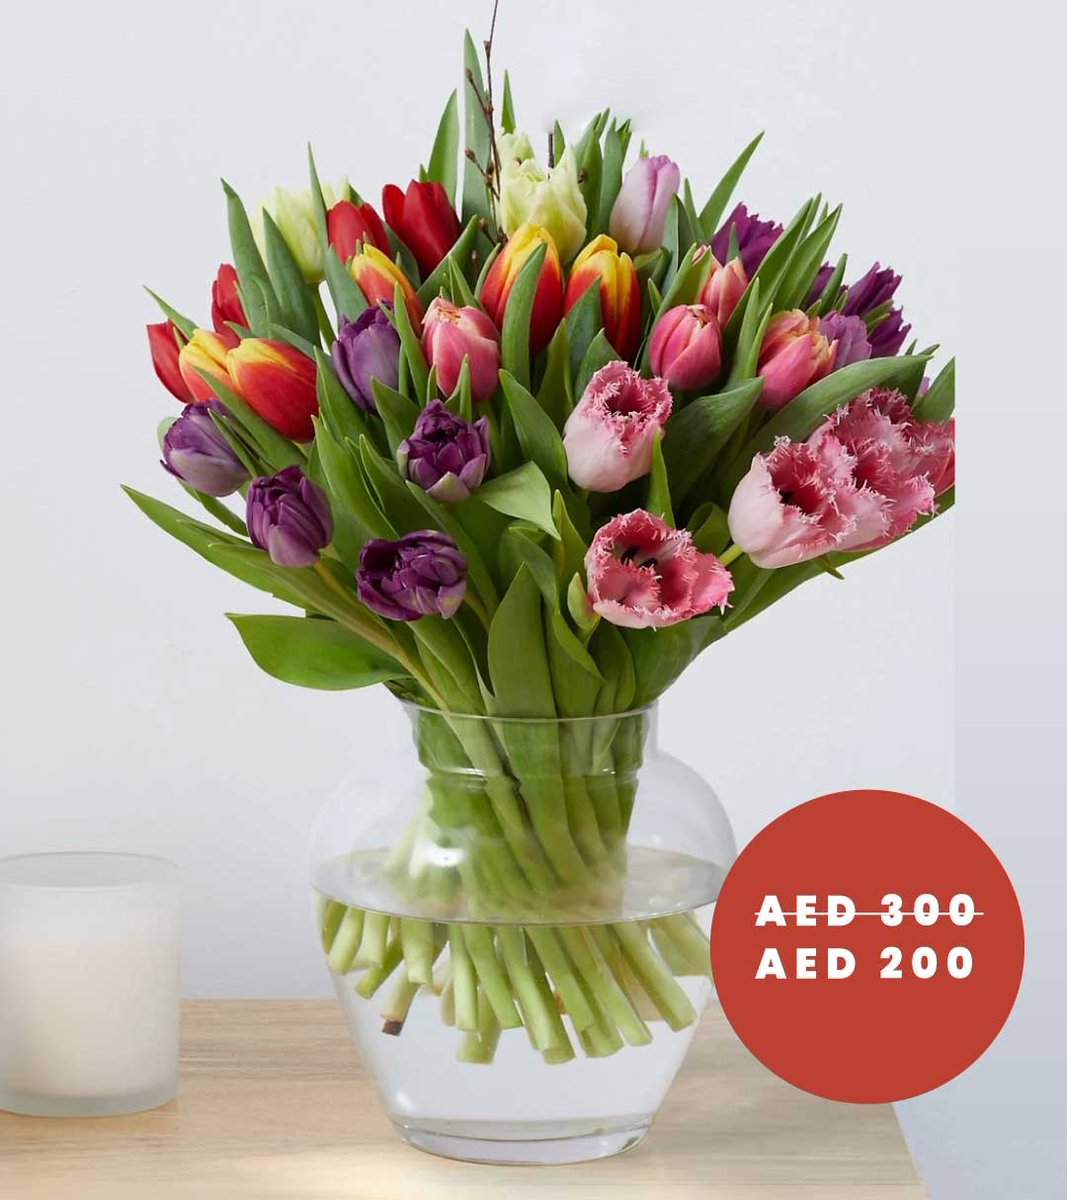 Get ready to celebrate Eid in style with our exquisite vase flower arrangements! 🌸🌷🌹 Enjoy a stunning floral display with 50% off on all Eid vase arrangements! Limited time offer, so grab yours today! 💐🎉 #EidFlowers #FlowerArrangement #EidSale #50PercentOff